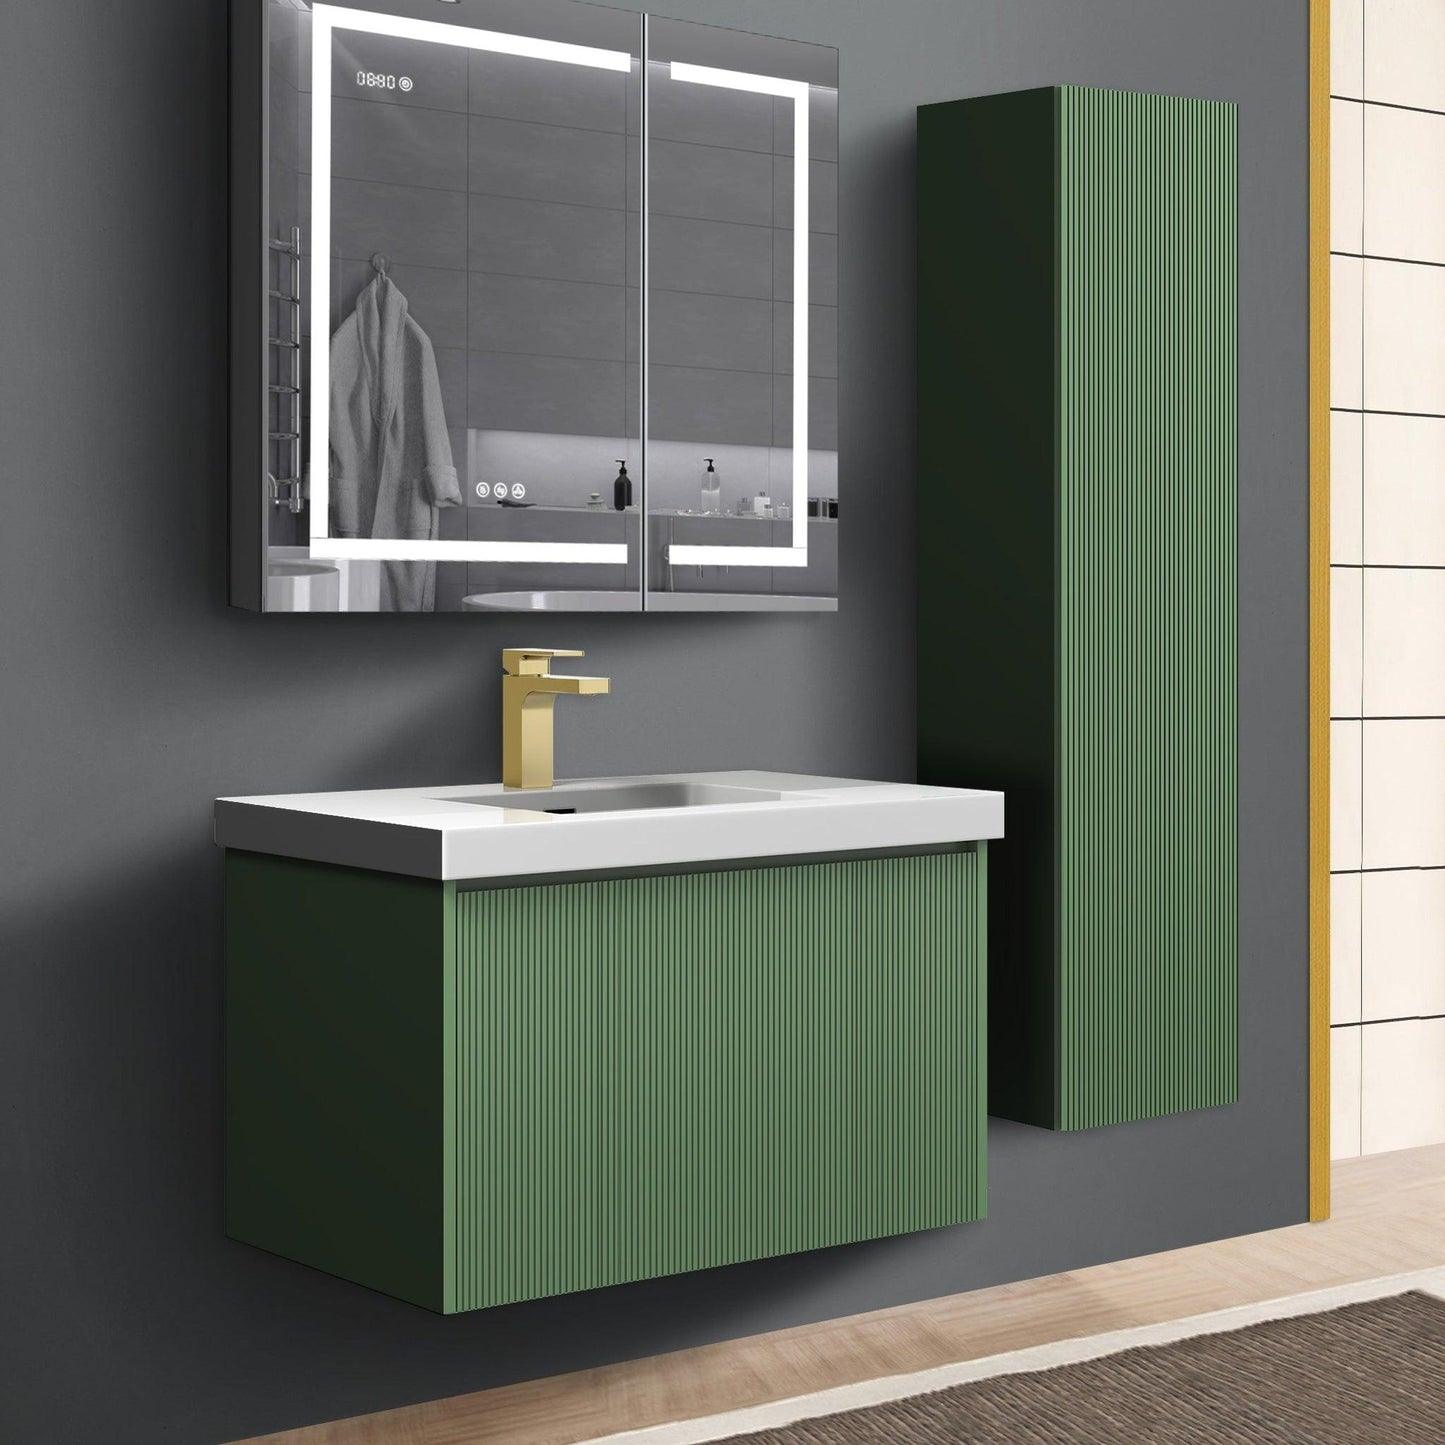 Blossom Positano 12" x 10" x 48" 1-Door Aventurine Green Wall-Mounted Side Cabinet With 1 Fixed Wood Shelve and 2 Adjustable Glass Shelves